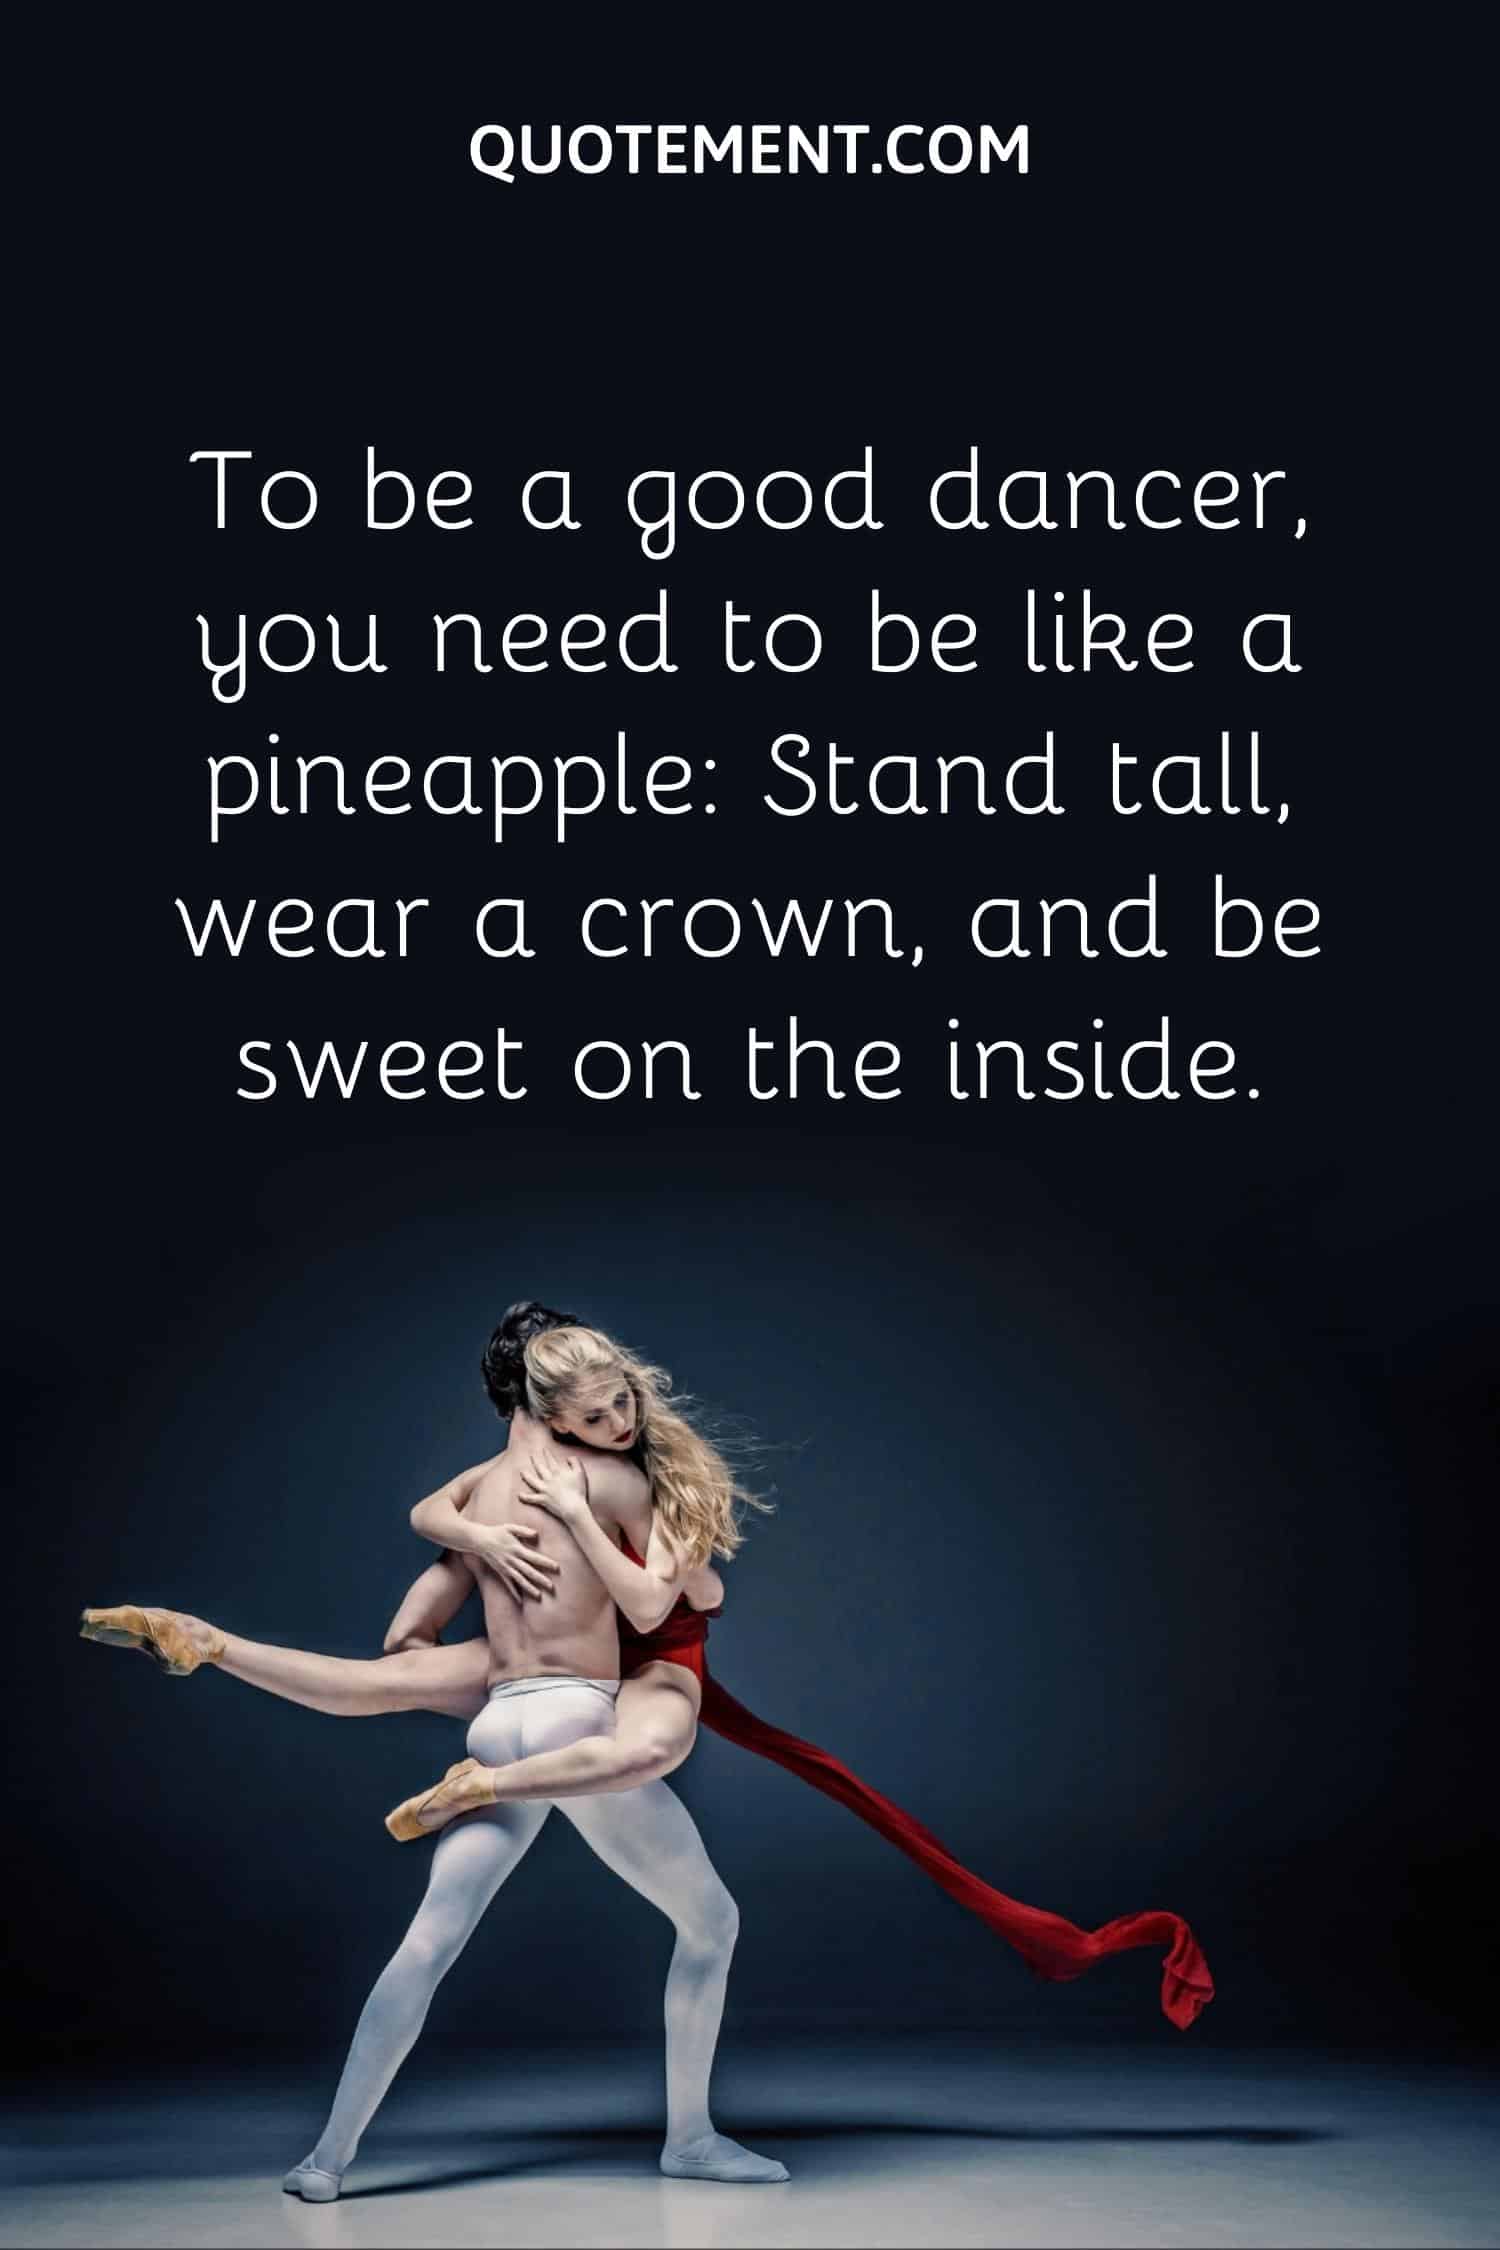 To be a good dancer, you need to be like a pineapple